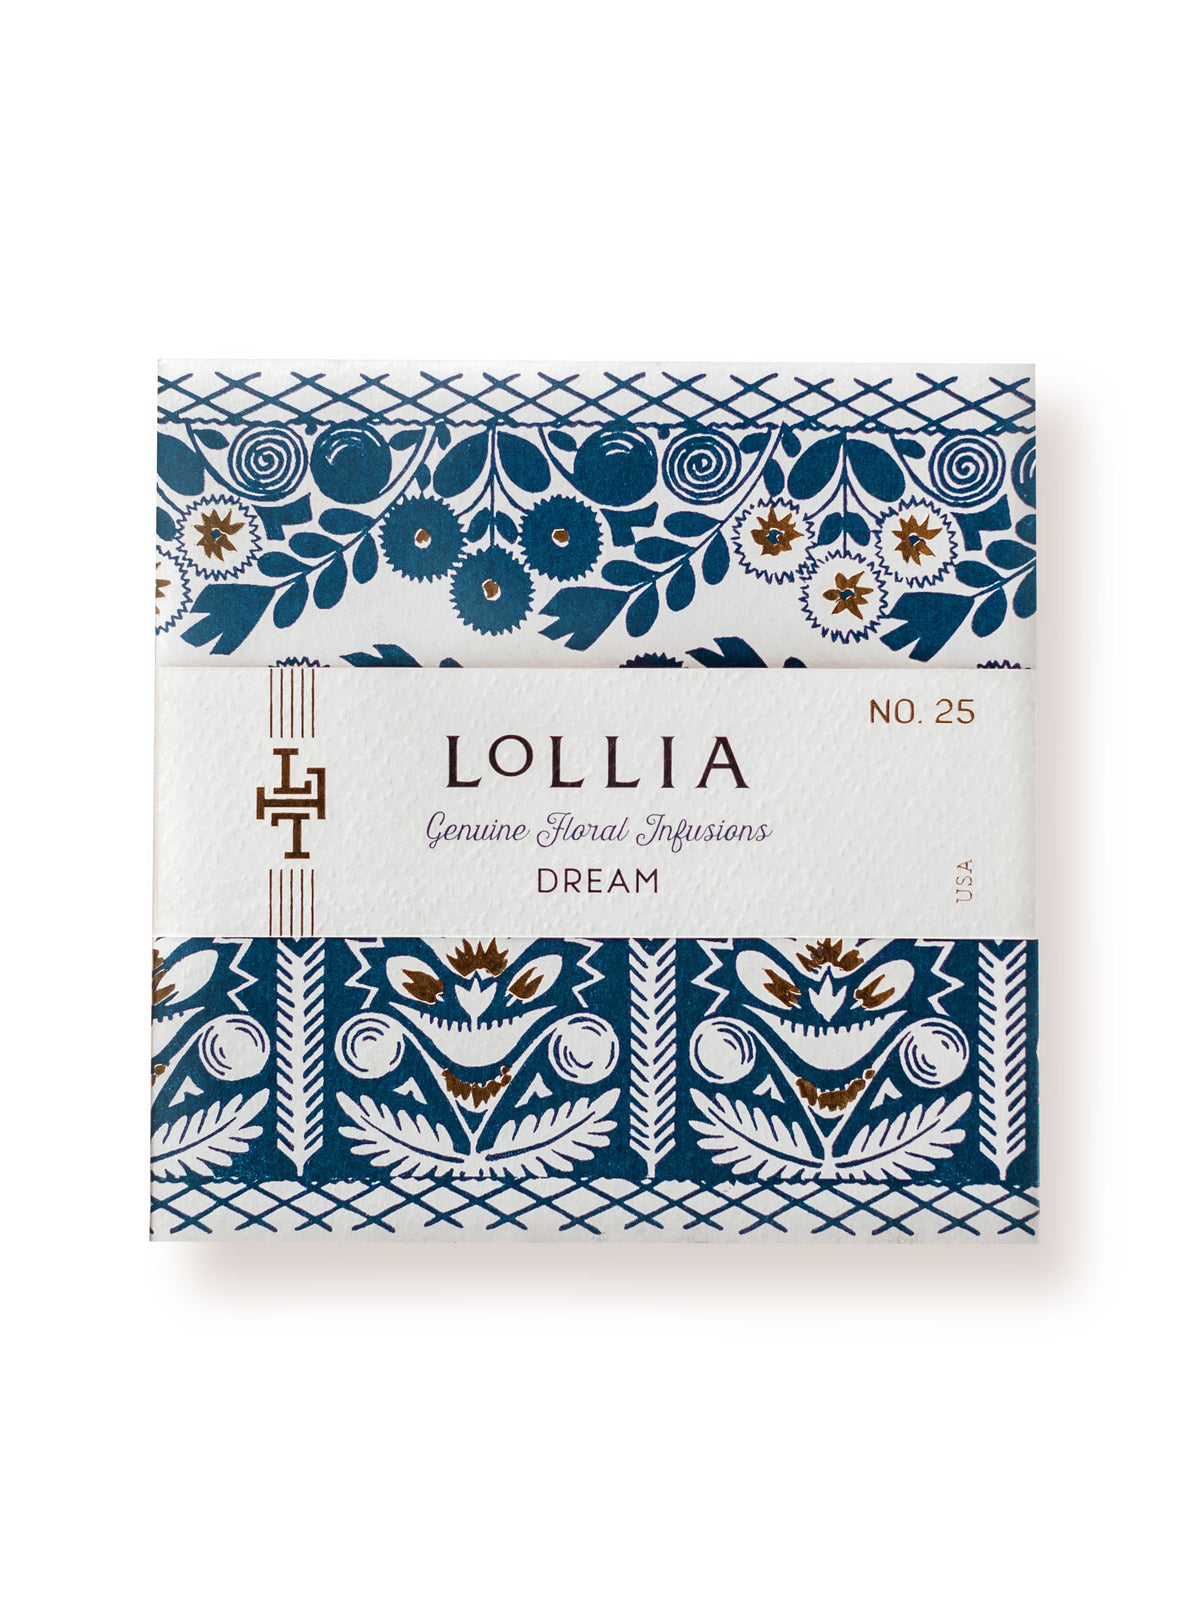 An elegant Lollia Dream Body Butter package featuring a floral design in blue and white tones with the brand name "Margot Elena" and the phrase "genuine White Tea & Honeysuckle infusions." The label